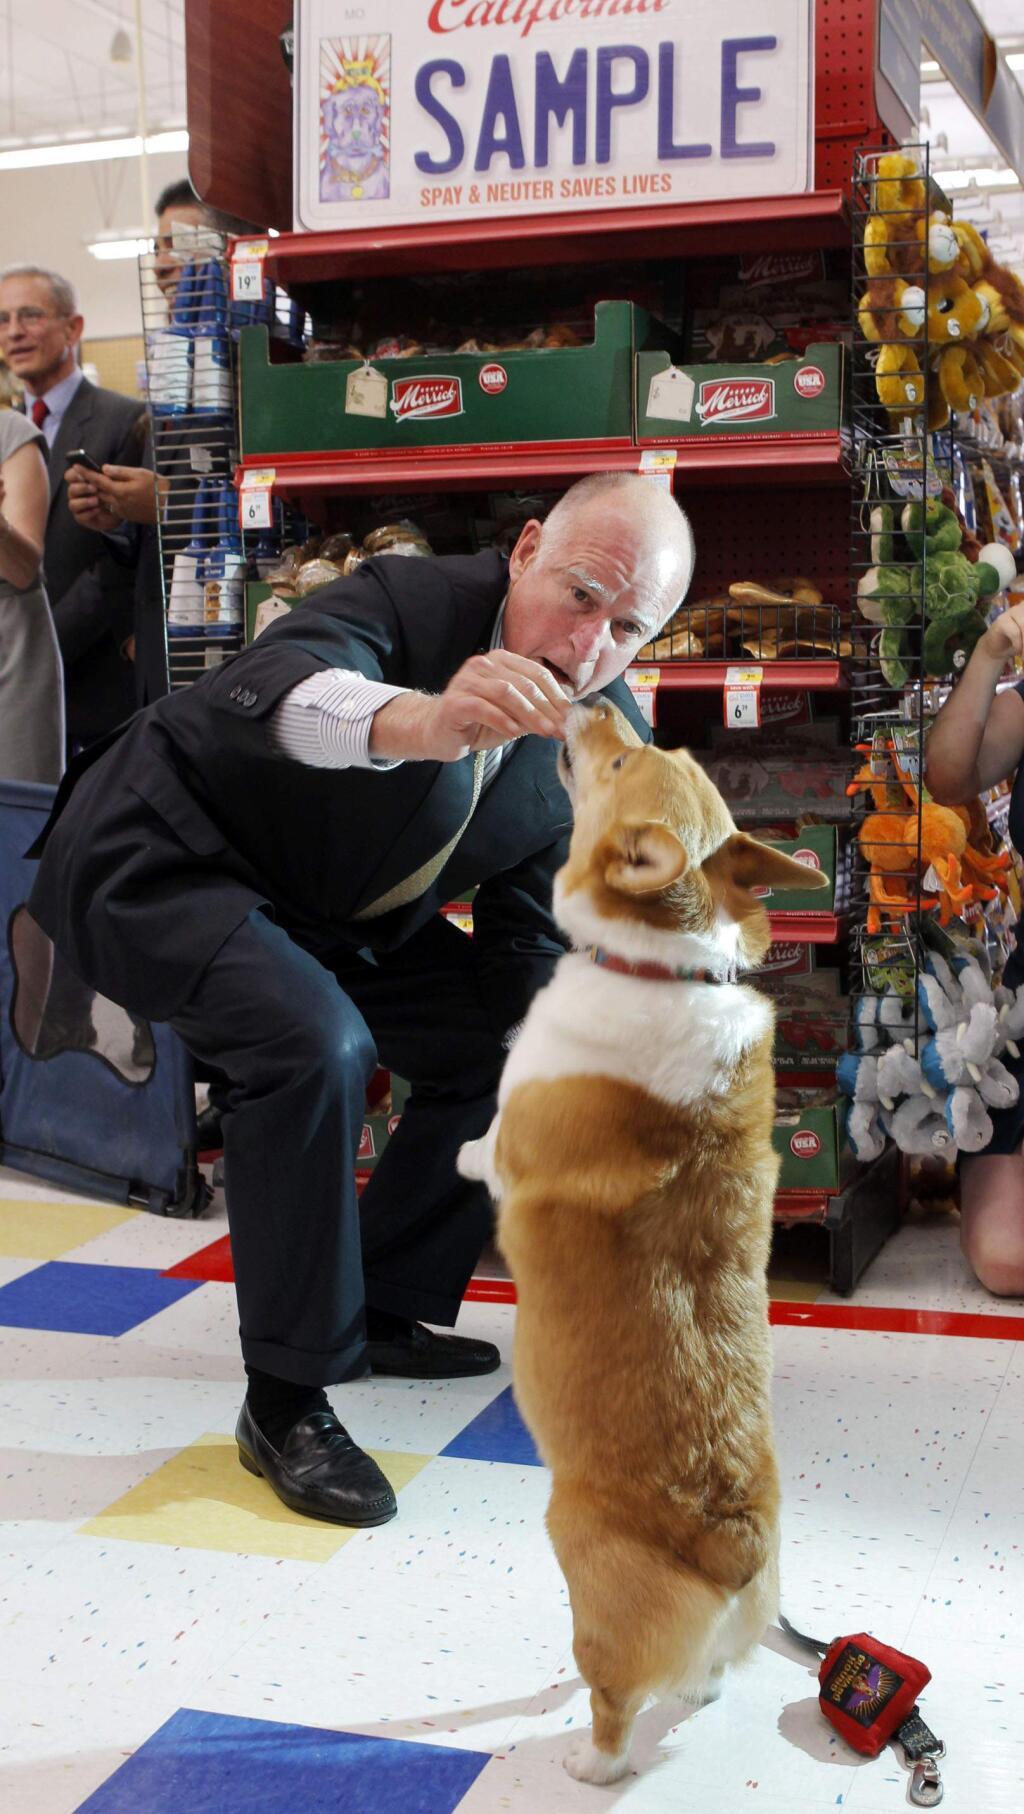 FILE - In this May 2, 2012, file photo, California Gov. Jerry Brown gives his dog, Sutter, food at a Petco store in Los Angeles. Brown spokesman Evan Westrup said Tuesday that Sutter was rushed to an animal hospital last week and underwent emergency surgery. Veterinarians removed several masses suspected to be cancer from his intestines, lymph nodes and liver. (AP Photo/Nick Ut, file)